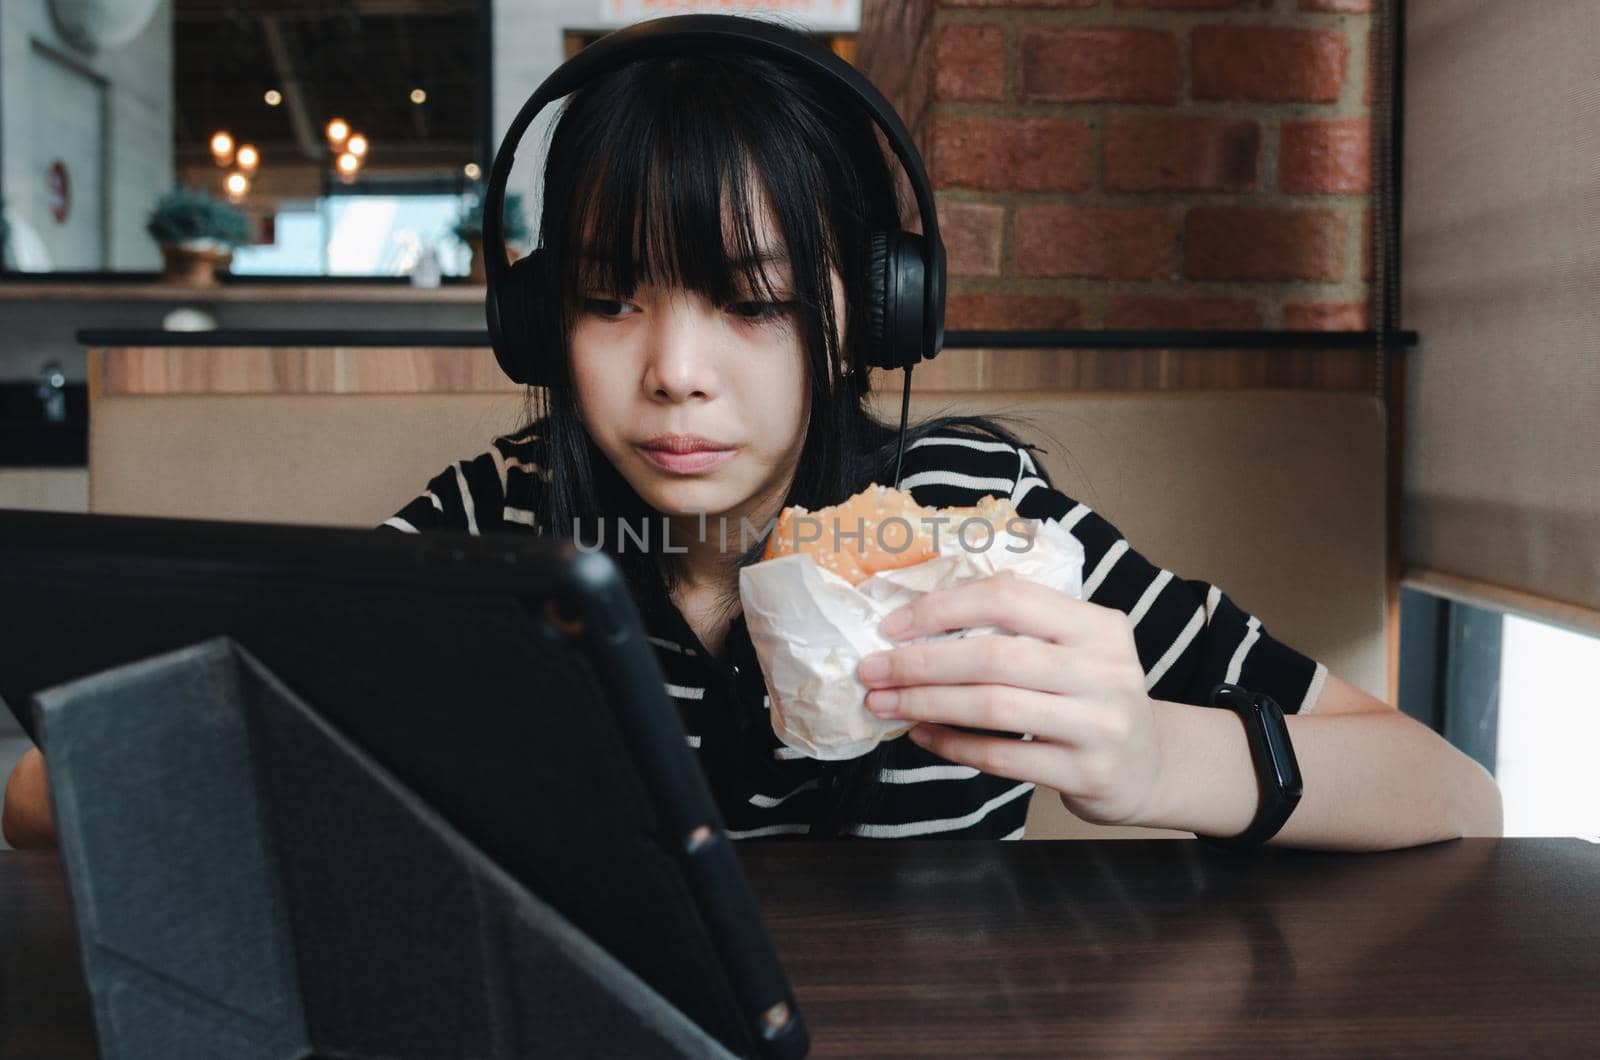 Girl eating burger watch your tablet and use headphones to listen to music or use social media. by aoo3771